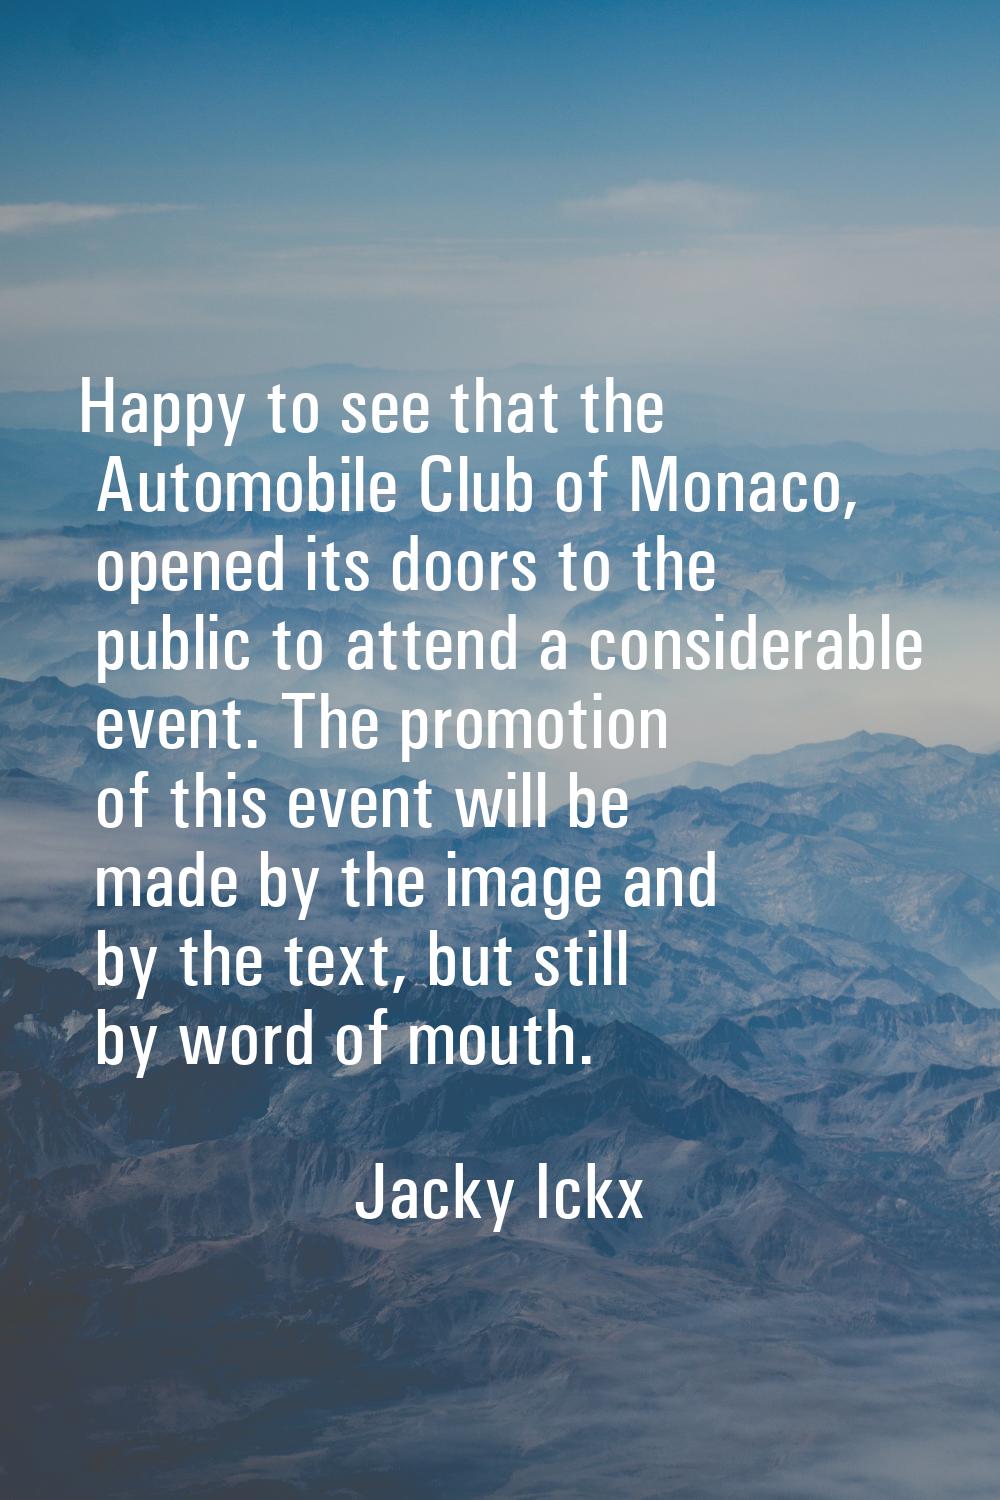 Happy to see that the Automobile Club of Monaco, opened its doors to the public to attend a conside